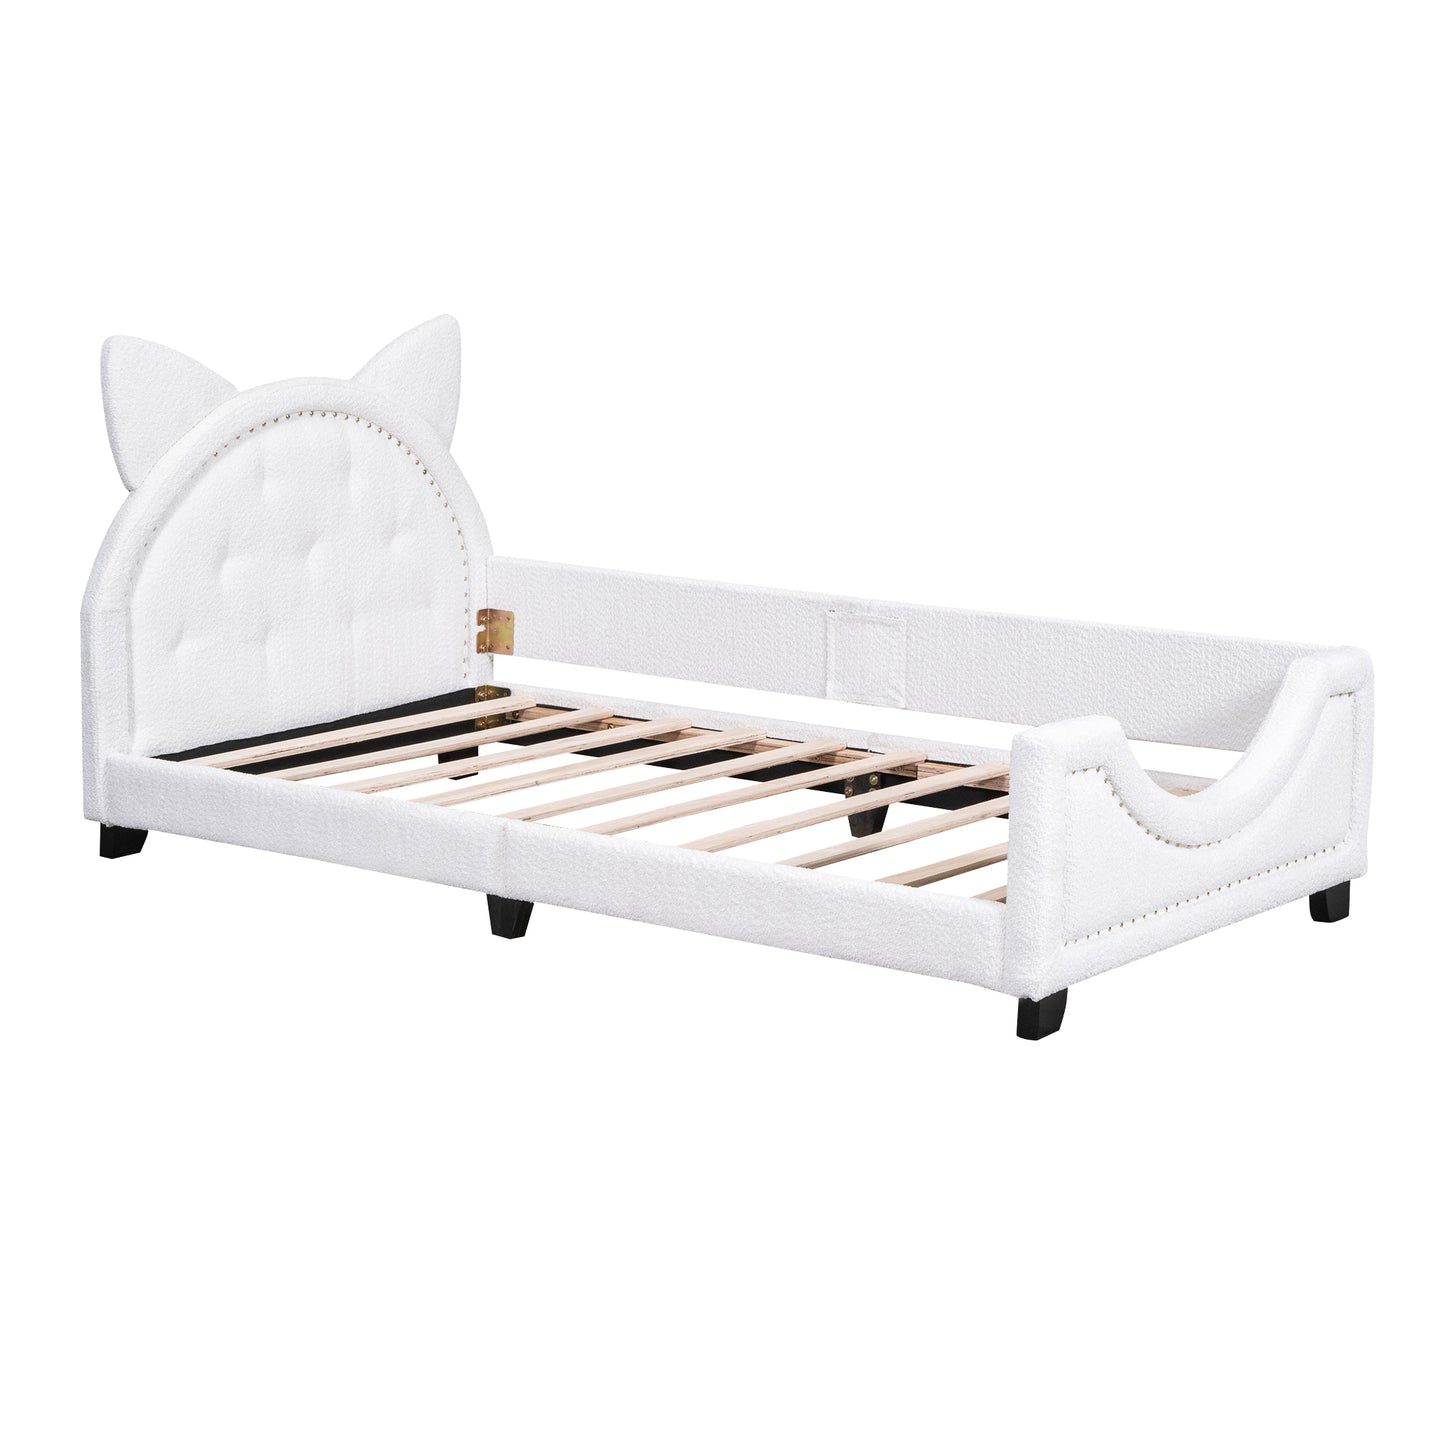 Teddy Fleece Twin Size Upholstered Daybed with Carton Ears Shaped Headboard, White